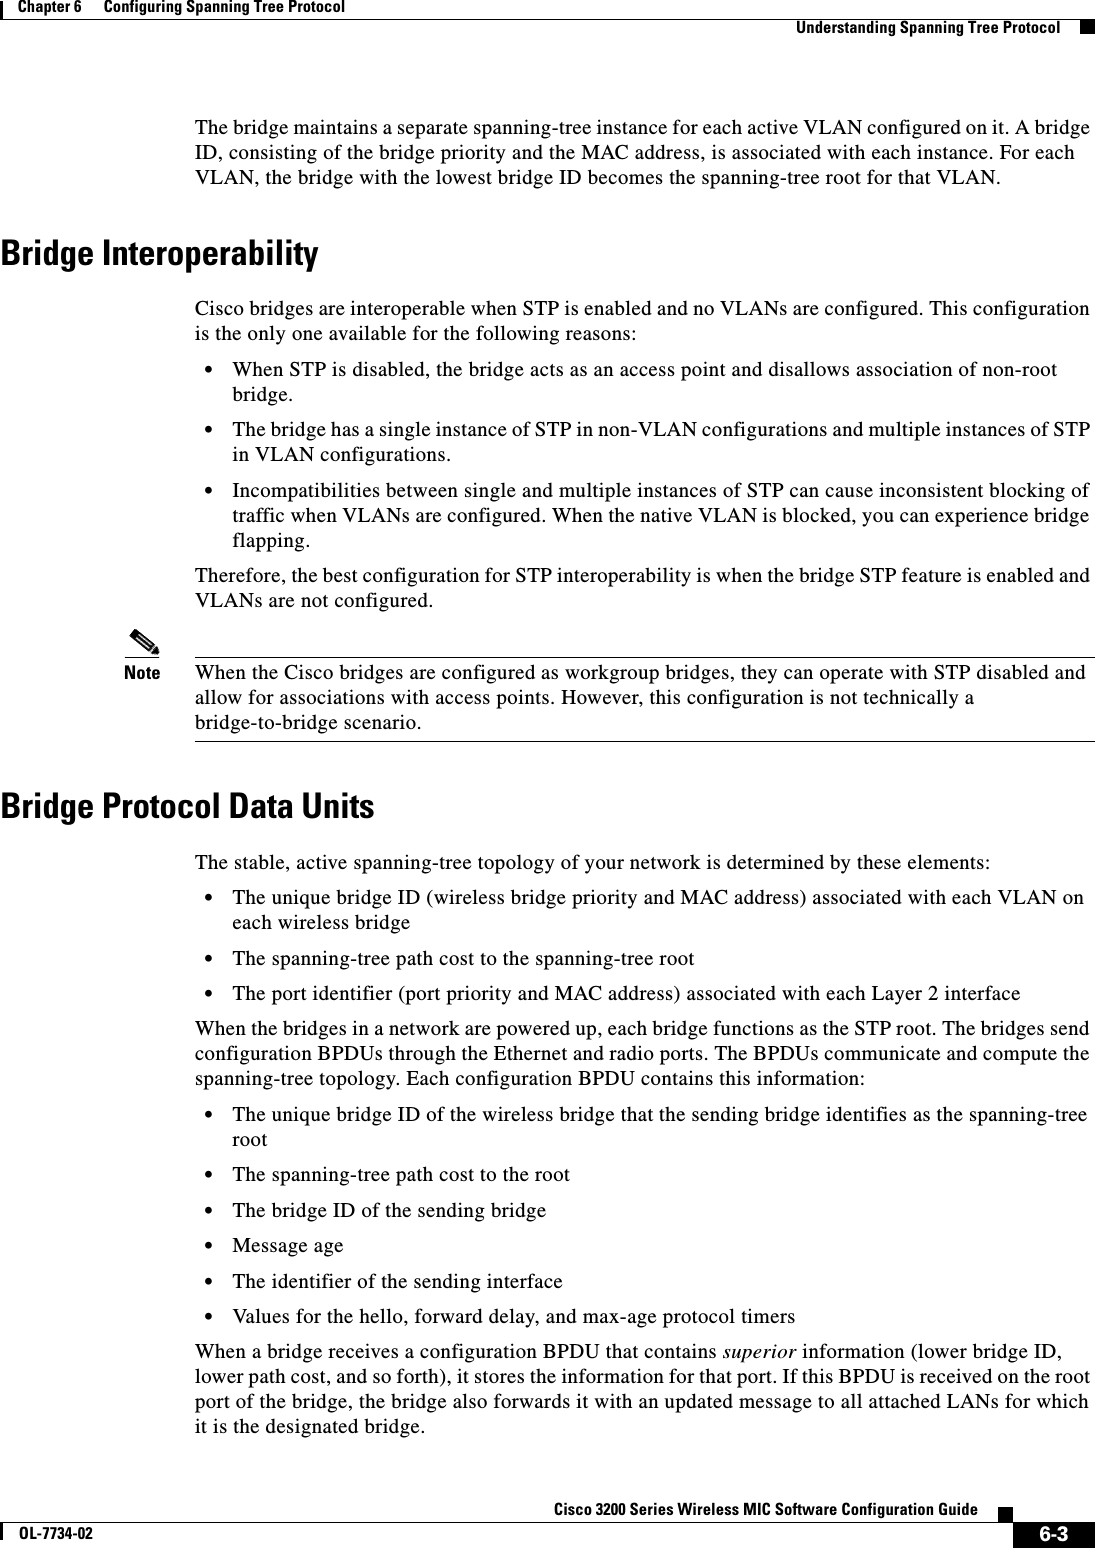 6-3Cisco 3200 Series Wireless MIC Software Configuration GuideOL-7734-02Chapter 6      Configuring Spanning Tree ProtocolUnderstanding Spanning Tree ProtocolThe bridge maintains a separate spanning-tree instance for each active VLAN configured on it. A bridge ID, consisting of the bridge priority and the MAC address, is associated with each instance. For each VLAN, the bridge with the lowest bridge ID becomes the spanning-tree root for that VLAN. Bridge InteroperabilityCisco bridges are interoperable when STP is enabled and no VLANs are configured. This configuration is the only one available for the following reasons:•When STP is disabled, the bridge acts as an access point and disallows association of non-root bridge.•The bridge has a single instance of STP in non-VLAN configurations and multiple instances of STP in VLAN configurations.•Incompatibilities between single and multiple instances of STP can cause inconsistent blocking of traffic when VLANs are configured. When the native VLAN is blocked, you can experience bridge flapping. Therefore, the best configuration for STP interoperability is when the bridge STP feature is enabled and VLANs are not configured. Note When the Cisco bridges are configured as workgroup bridges, they can operate with STP disabled and allow for associations with access points. However, this configuration is not technically a bridge-to-bridge scenario.Bridge Protocol Data UnitsThe stable, active spanning-tree topology of your network is determined by these elements:•The unique bridge ID (wireless bridge priority and MAC address) associated with each VLAN on each wireless bridge•The spanning-tree path cost to the spanning-tree root•The port identifier (port priority and MAC address) associated with each Layer 2 interfaceWhen the bridges in a network are powered up, each bridge functions as the STP root. The bridges send configuration BPDUs through the Ethernet and radio ports. The BPDUs communicate and compute the spanning-tree topology. Each configuration BPDU contains this information:•The unique bridge ID of the wireless bridge that the sending bridge identifies as the spanning-tree root•The spanning-tree path cost to the root•The bridge ID of the sending bridge•Message age•The identifier of the sending interface•Values for the hello, forward delay, and max-age protocol timersWhen a bridge receives a configuration BPDU that contains superior information (lower bridge ID, lower path cost, and so forth), it stores the information for that port. If this BPDU is received on the root port of the bridge, the bridge also forwards it with an updated message to all attached LANs for which it is the designated bridge.